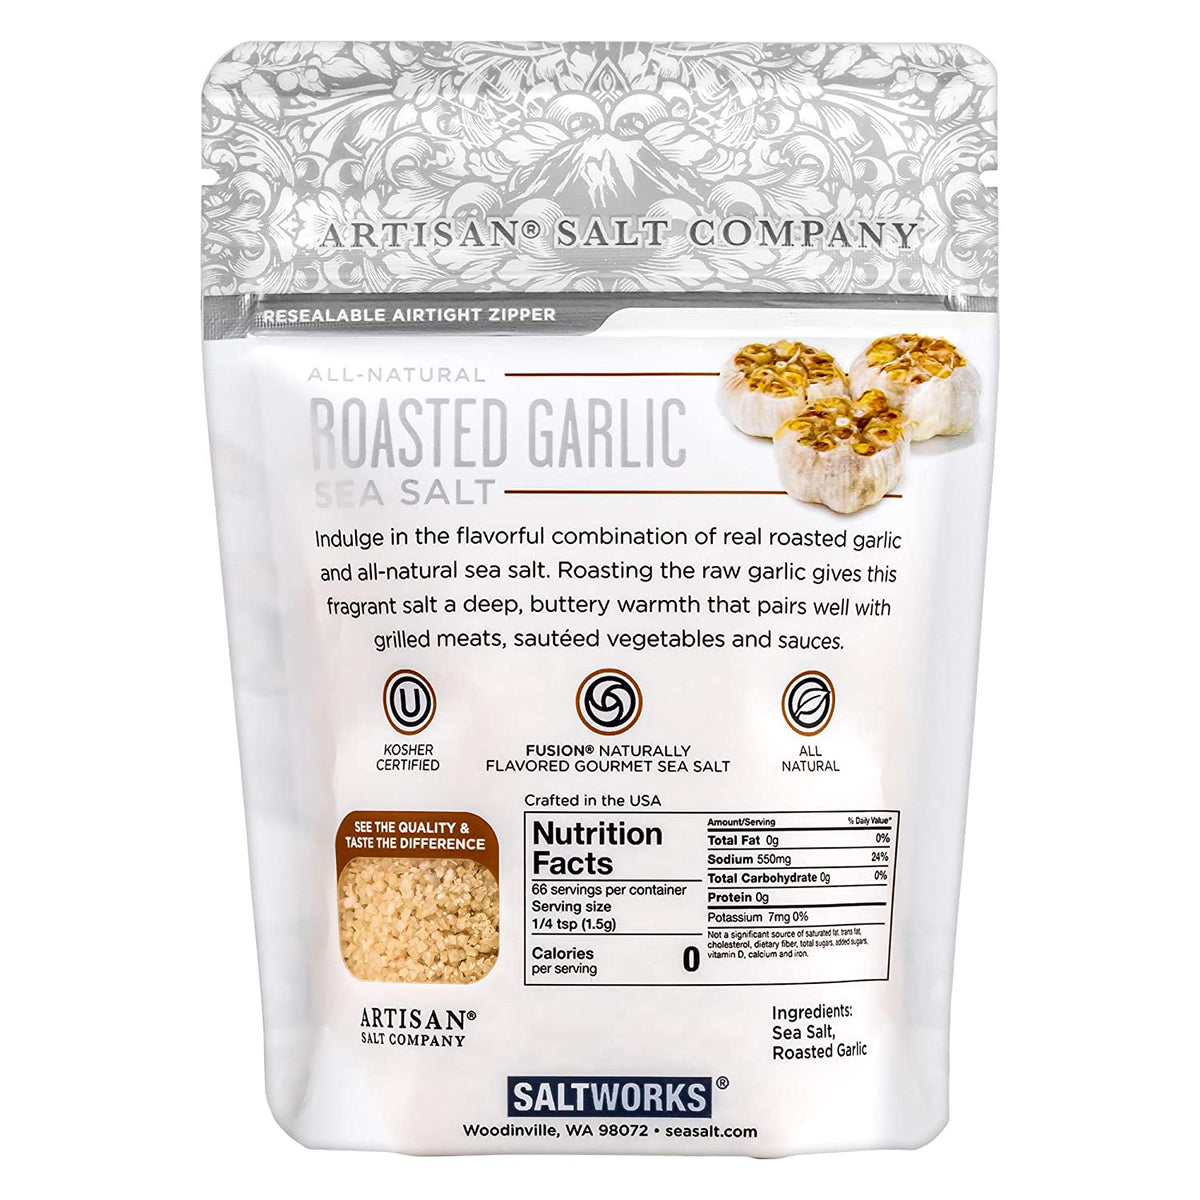 Garlic Flavored Sea Salt, Real all Natural Sea Salt Fused with Golden-brown roasted Garlic, Zip Top Pouch (3.5 oz) by Alpha Omega Imports